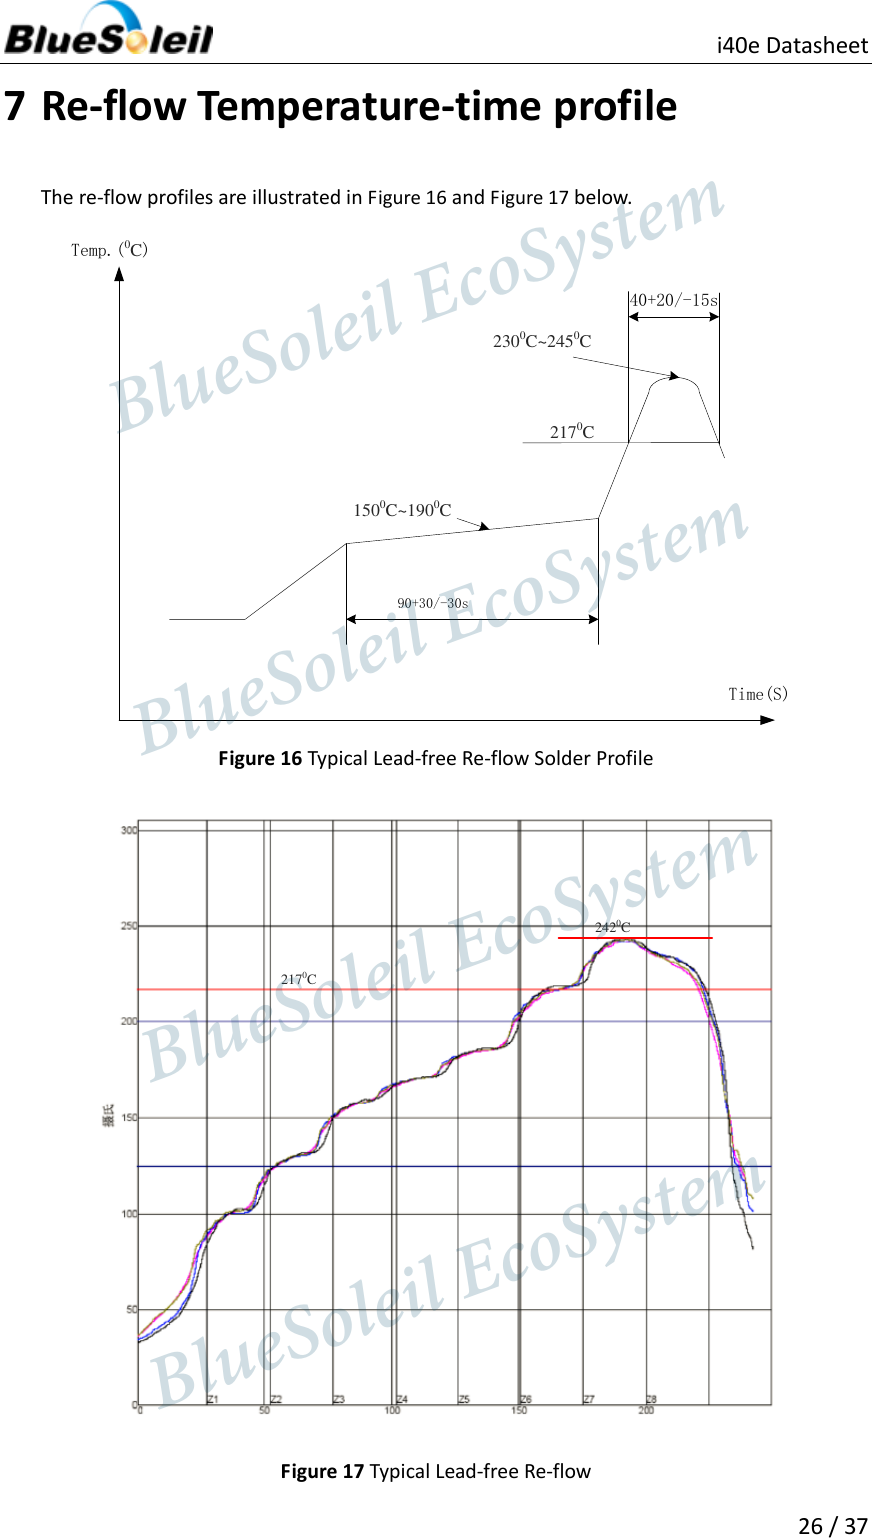                          i40e Datasheet  26 / 37  7 Re-flow Temperature-time profile The re-flow profiles are illustrated in Figure 16 and Figure 17 below. 40+20/-15s2170C90+30/-30s2300C~2450C1500C~1900CTemp.(0C)Time(S) Figure 16 Typical Lead-free Re-flow Solder Profile 2170C2420C Figure 17 Typical Lead-free Re-flow                  BlueSoleil EcoSystem            BlueSoleil EcoSystem      BlueSoleil EcoSystemBlueSoleil EcoSystem